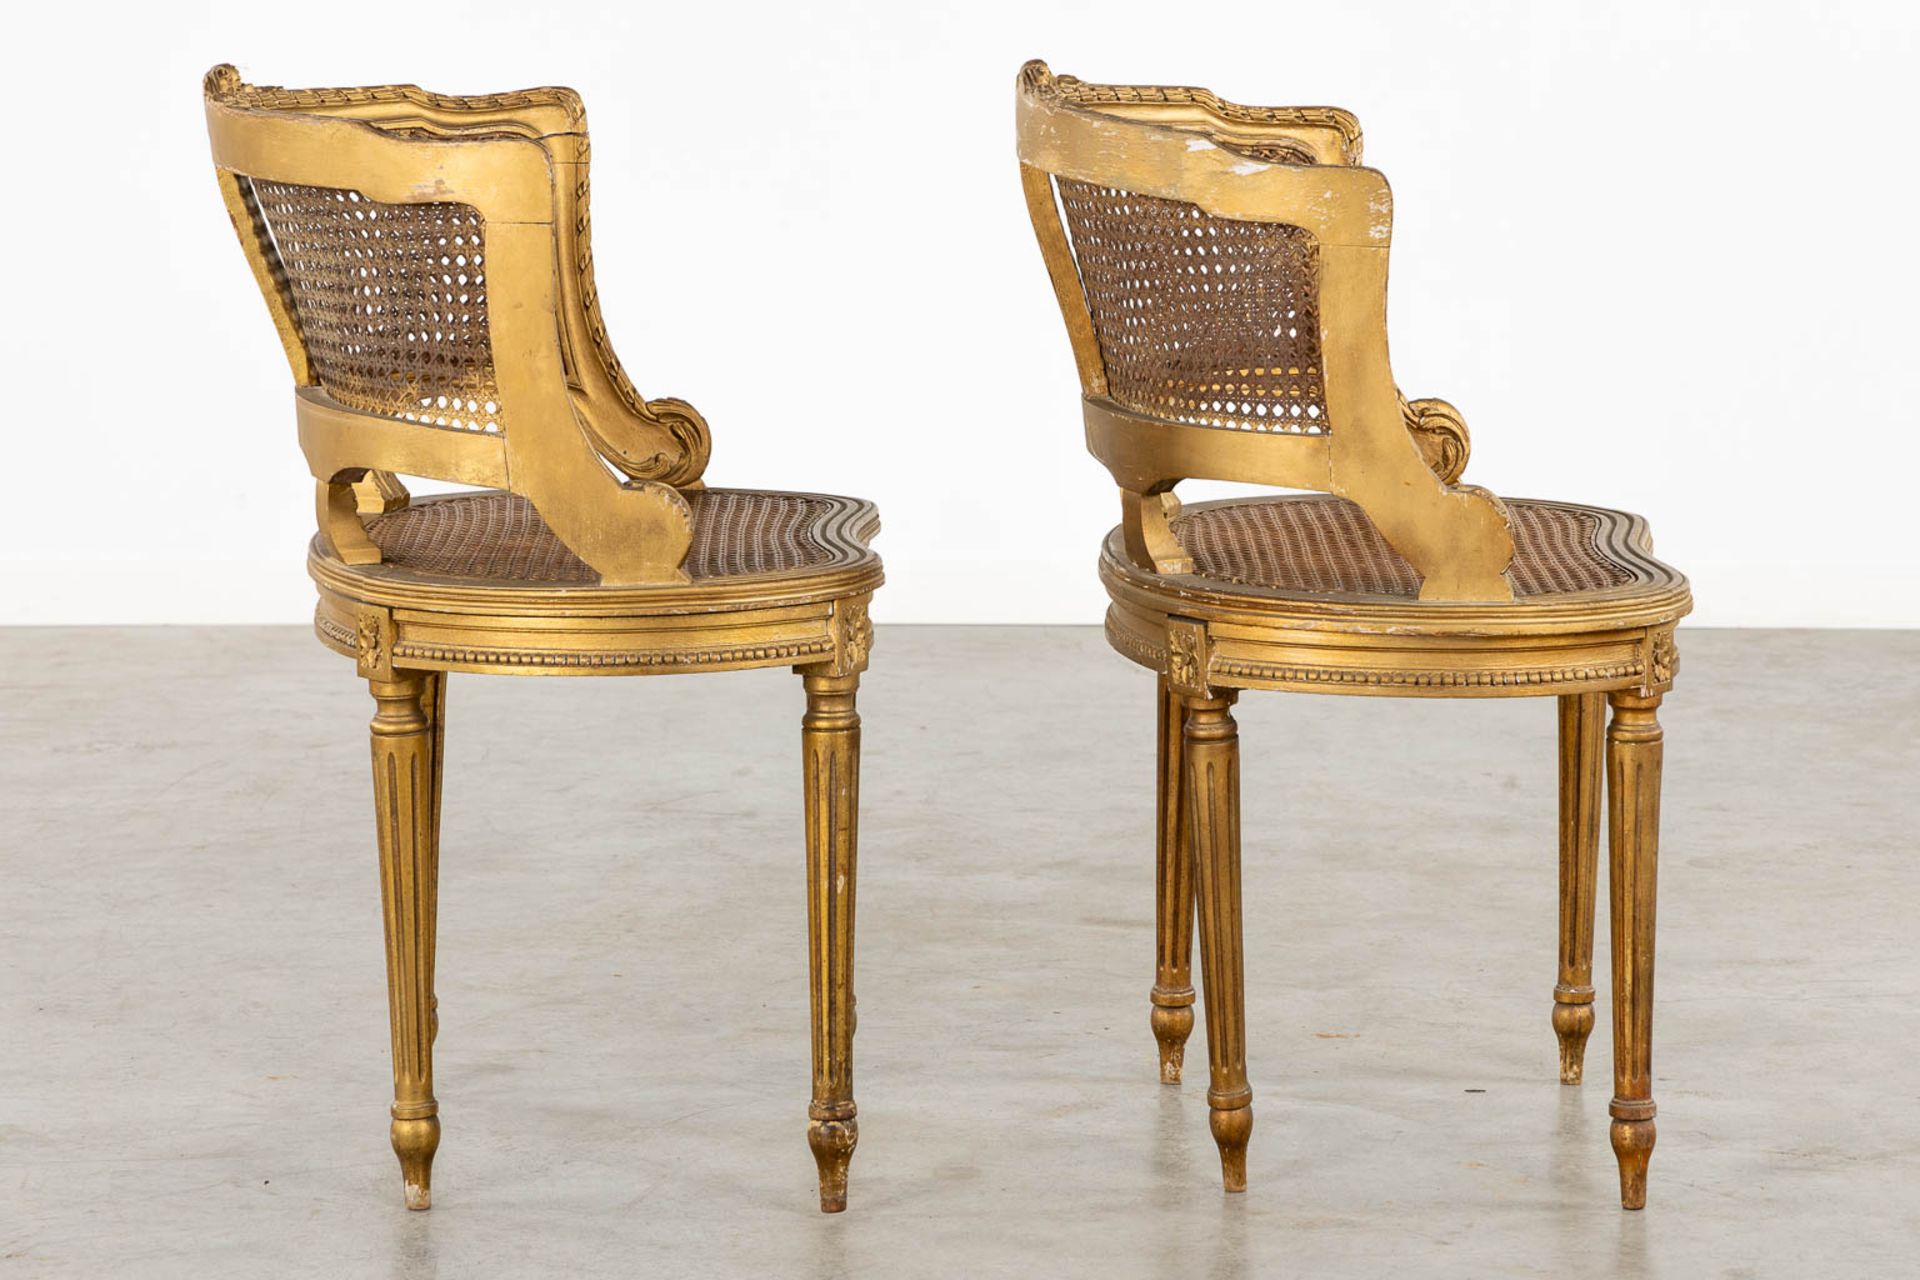 Two side tables, Two chairs, sculptured wood in Louis XVI style. Circa 1900. (L:57 x W:81 x H:75 cm) - Bild 12 aus 18